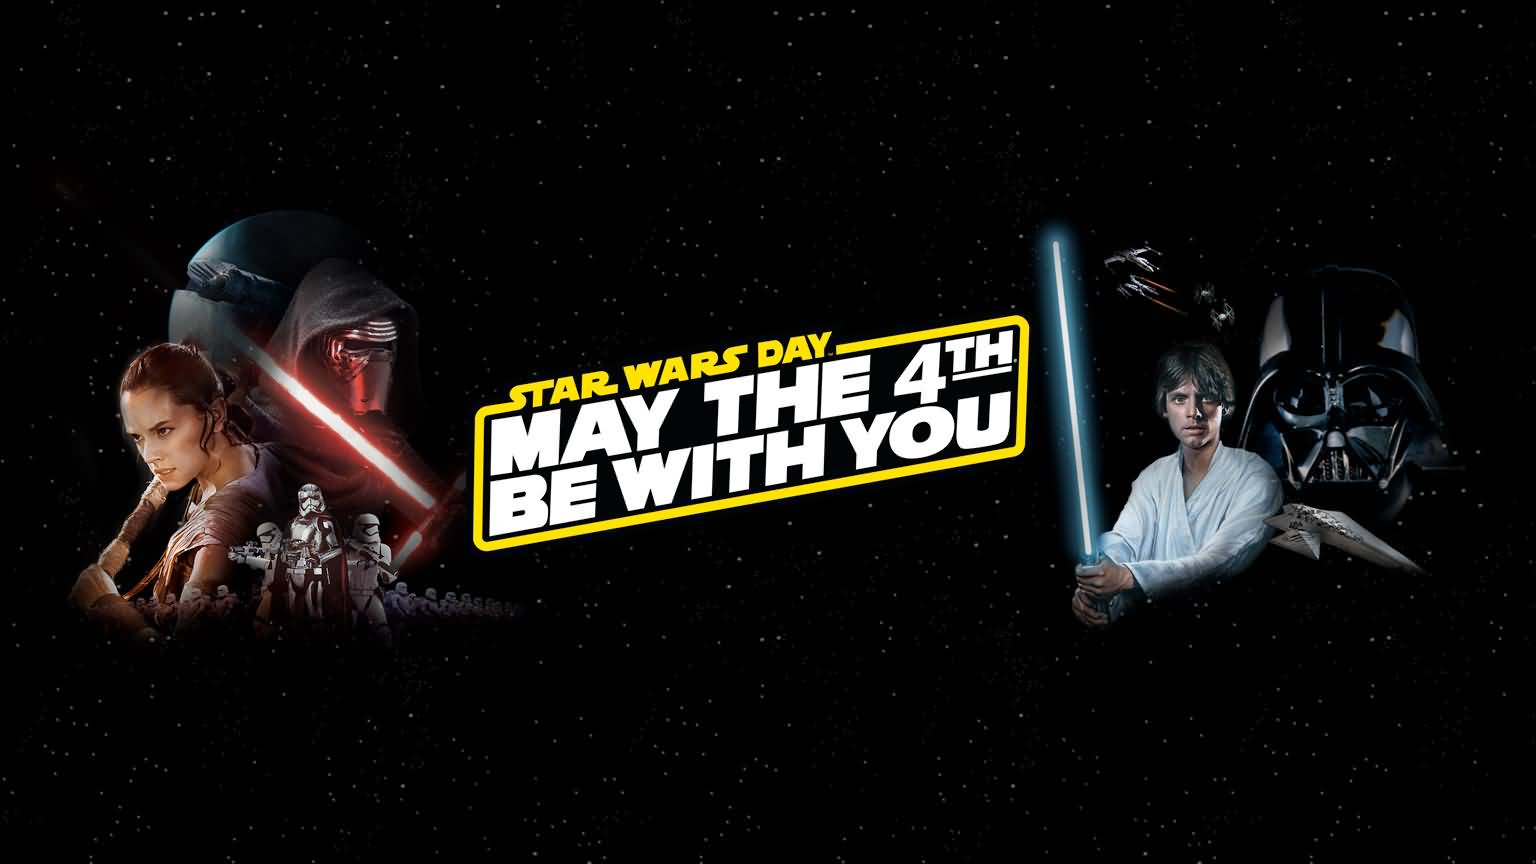 Read Complete Star Wars Day May The 4th Be With You Picture